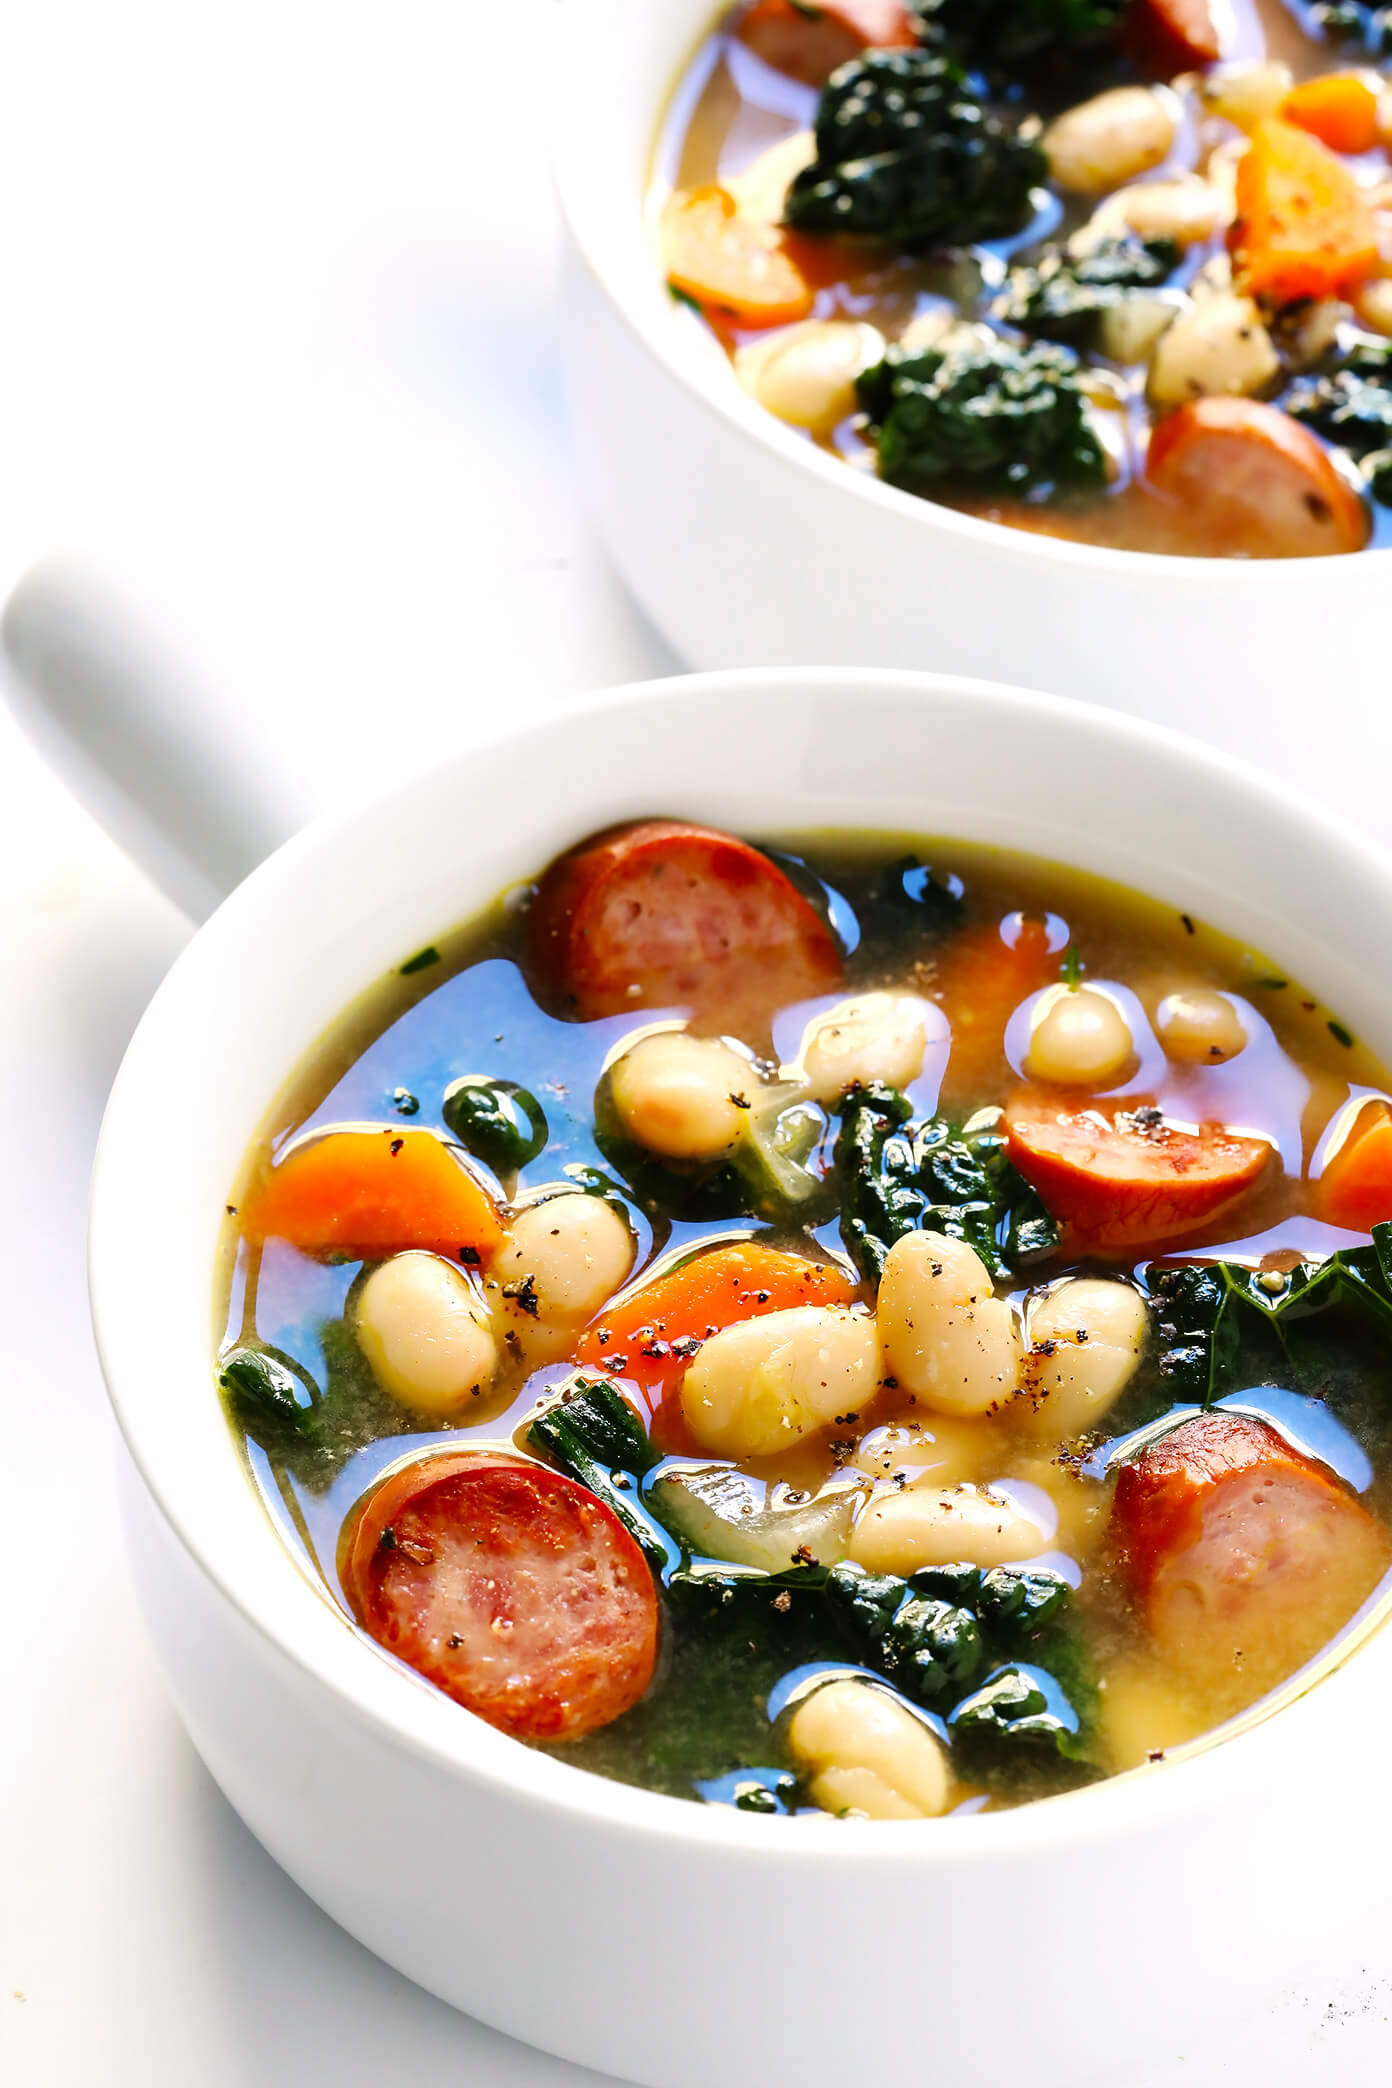 This Tuscan White Beans, Sausage and Kale Soup is one of my favorite winter dinner recipes. It's easy to make, full of cozy Italian flavors, and it's so warm and comforting. | Gimme Some Oven #souprecipe #healthysoup #italianrecipes